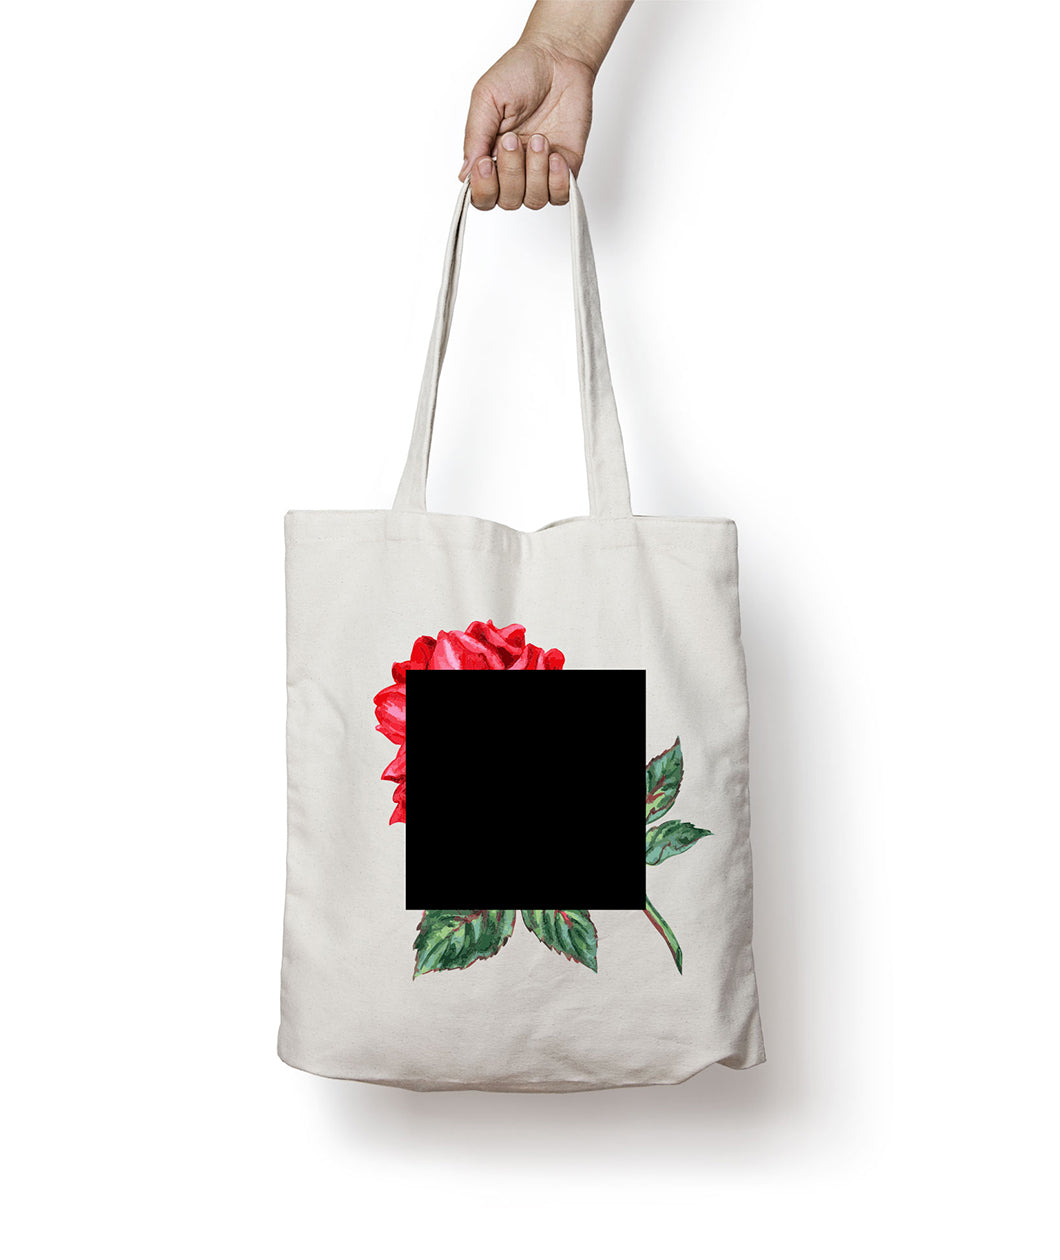 A white tote bag with a red rose with a green stem and leaves covered by a black square - from The Art Assignment